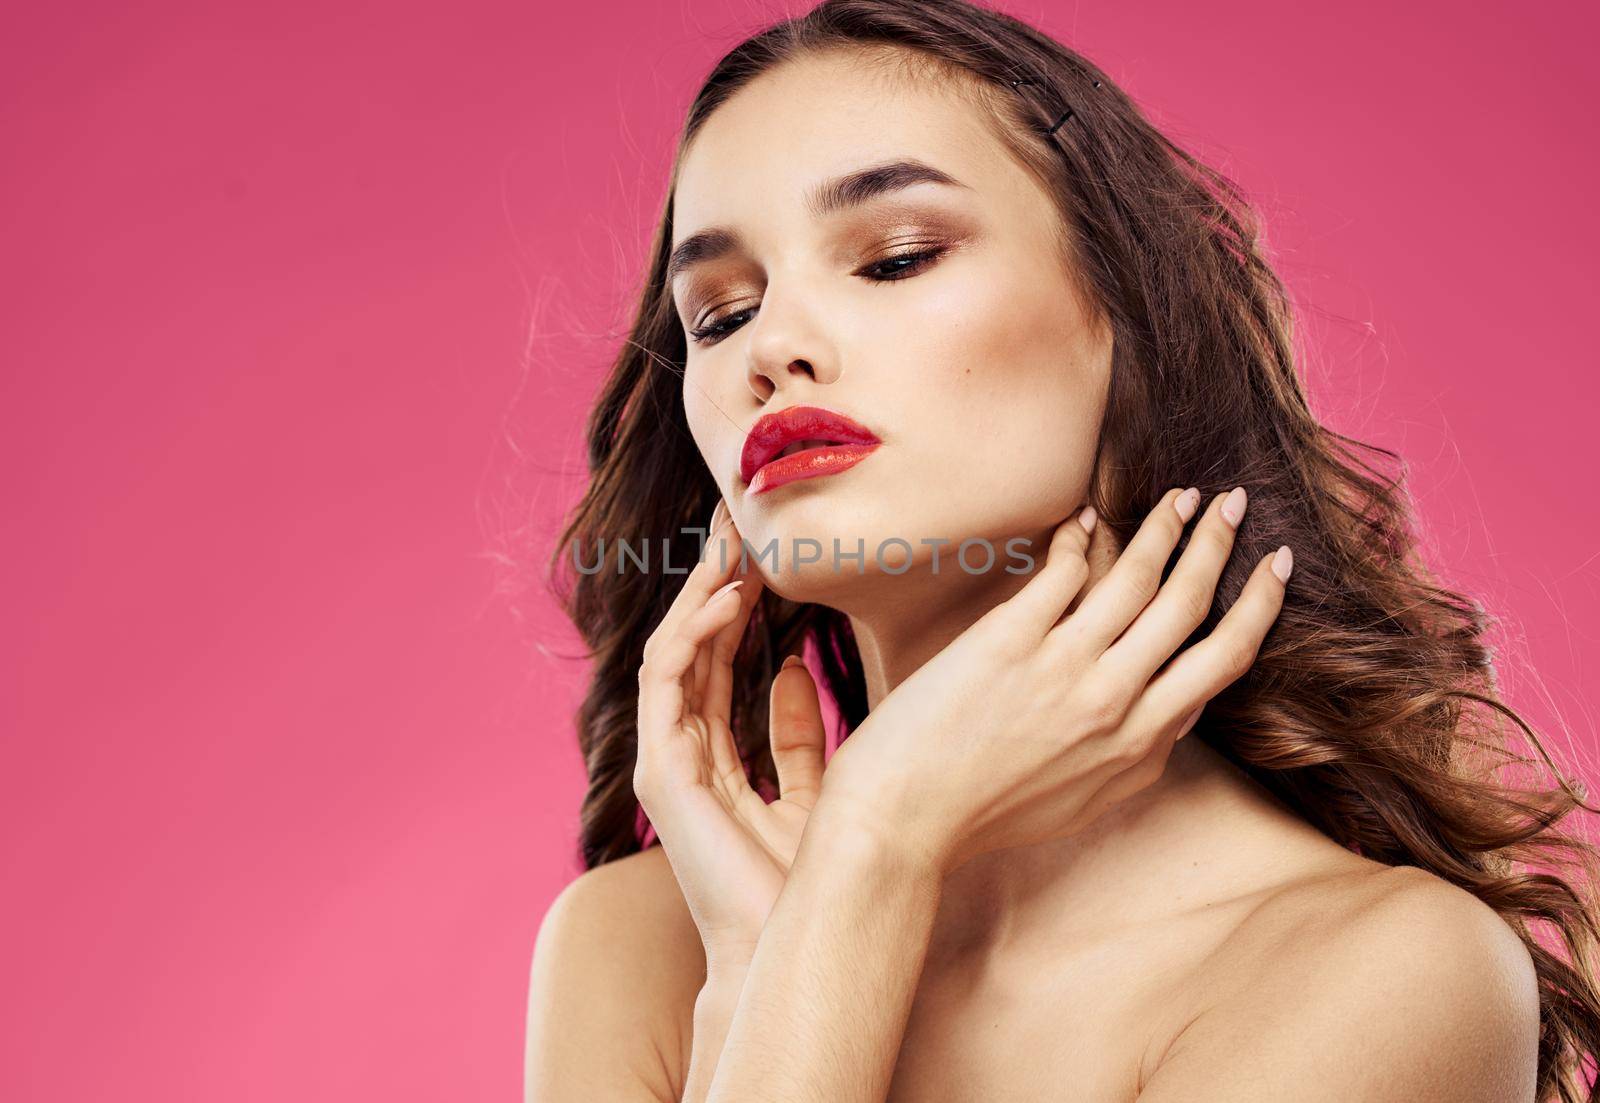 Sexy brunette with red lips on a pink background touch her hair with her hands. High quality photo